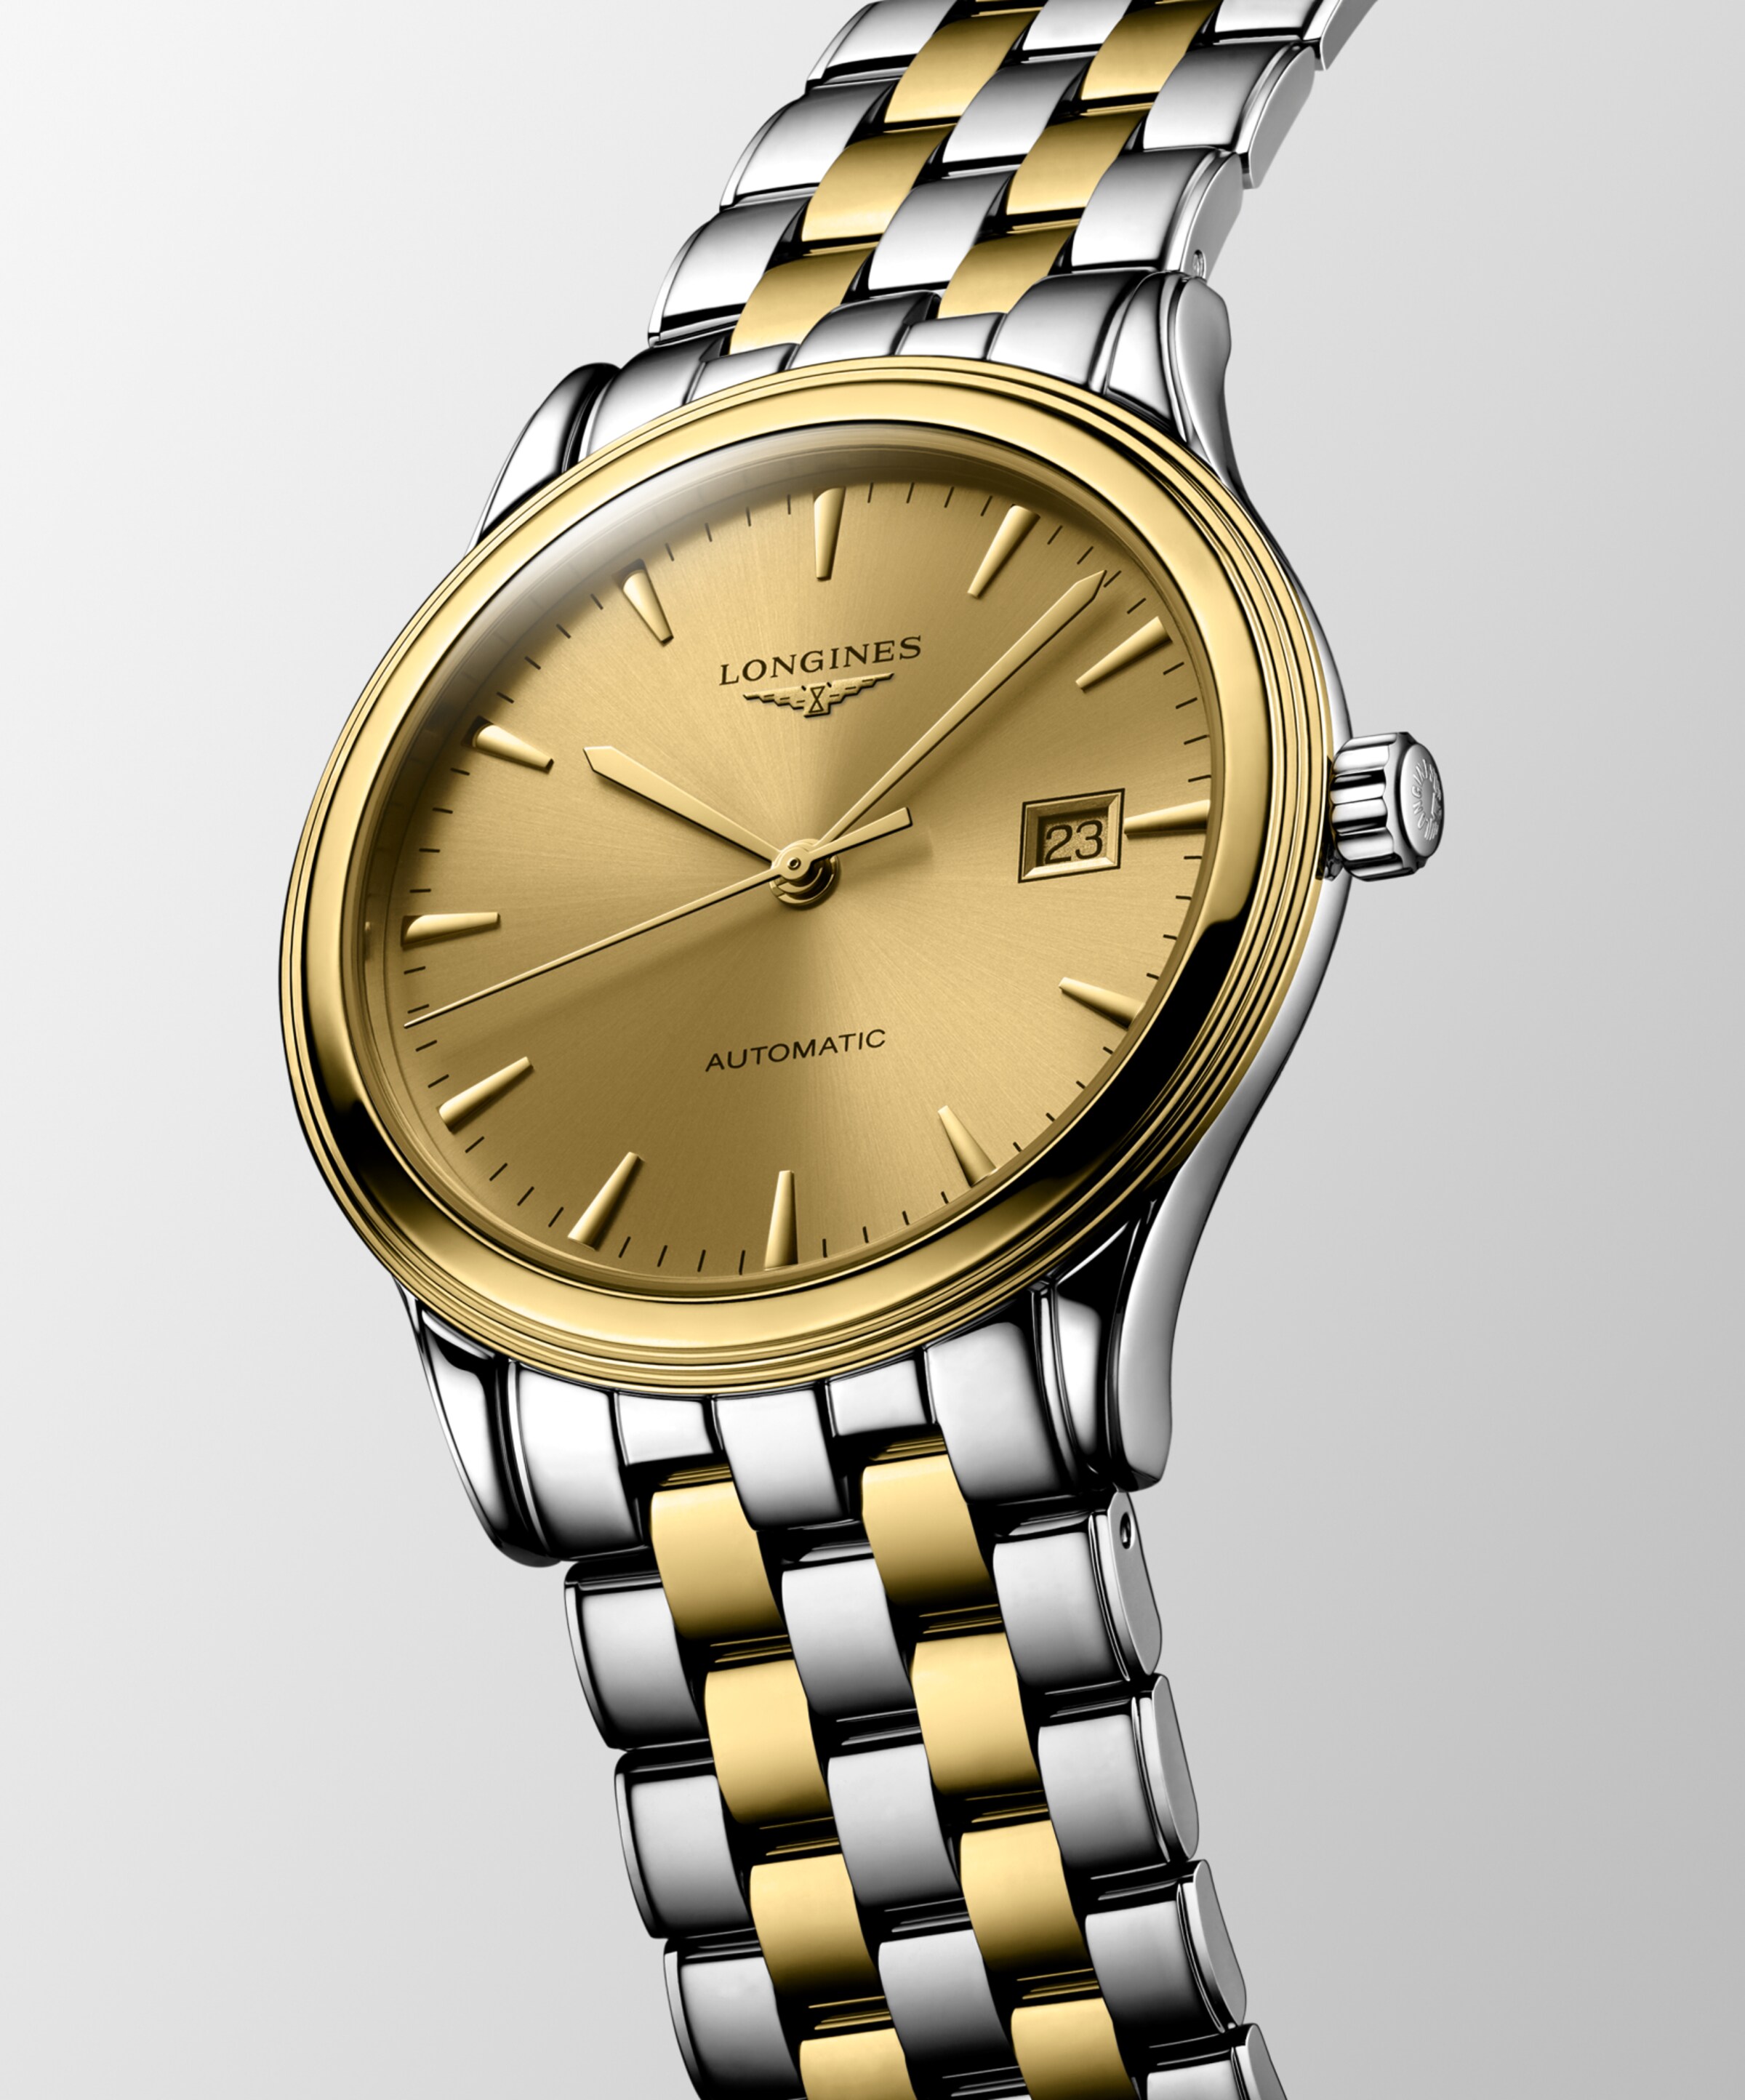 Longines FLAGSHIP Automatic Stainless steel and yellow PVD coating Watch - L4.984.3.32.7